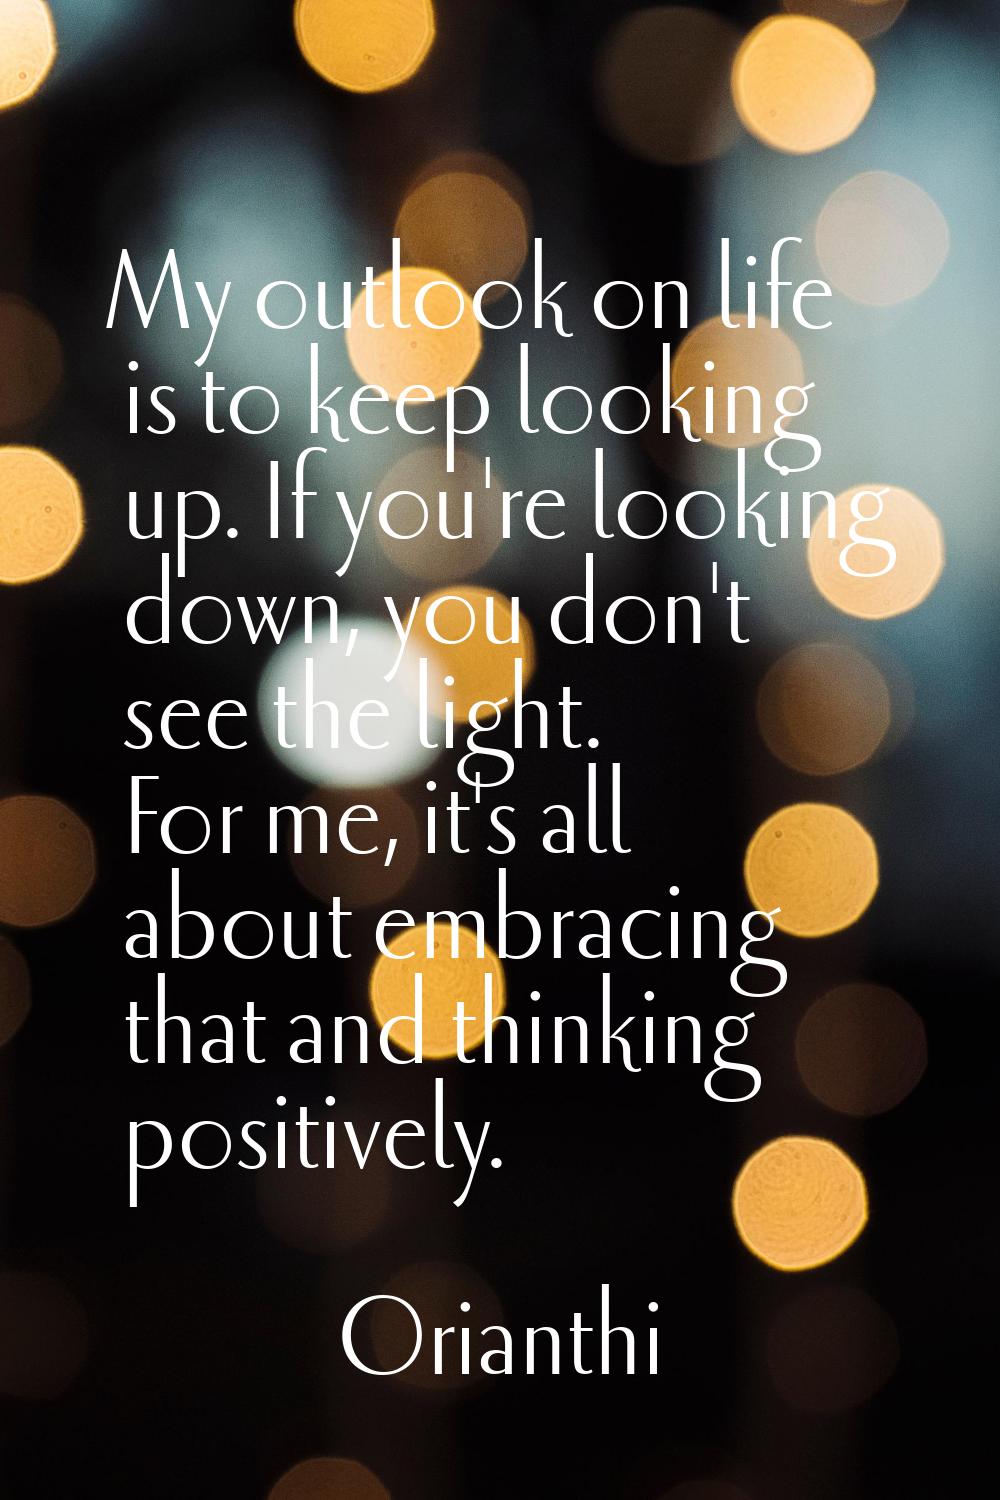 My outlook on life is to keep looking up. If you're looking down, you don't see the light. For me, 